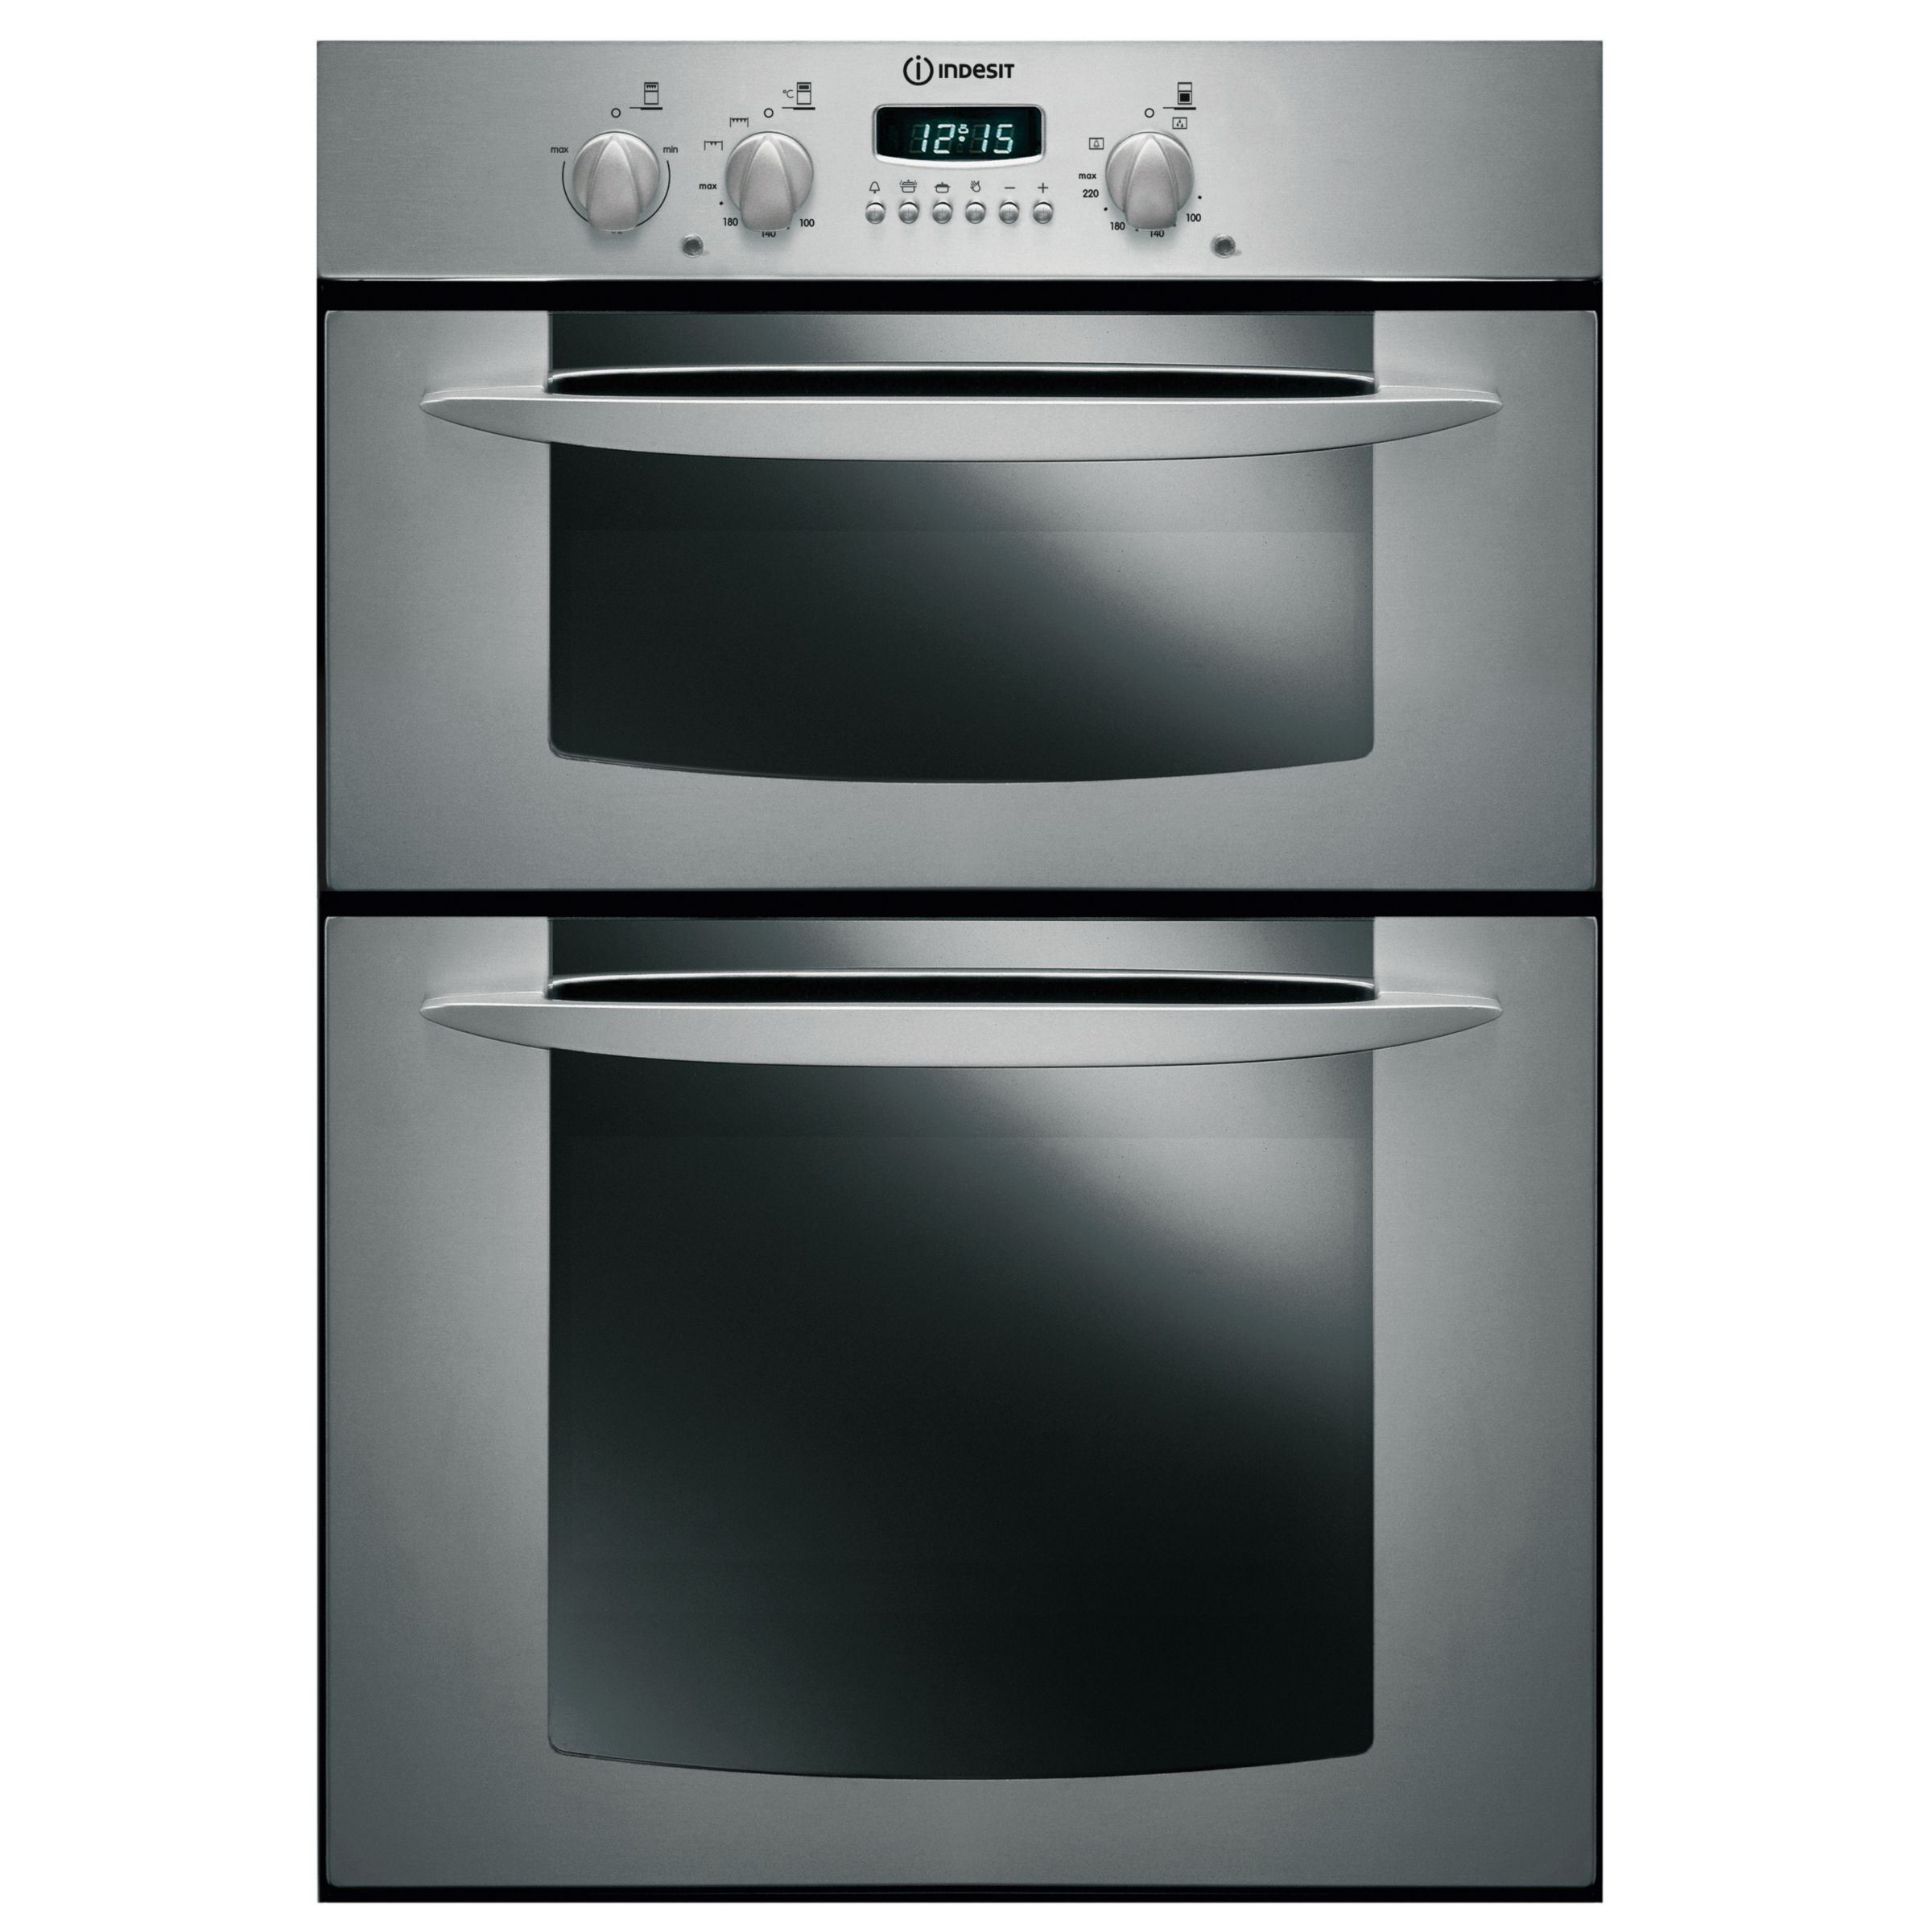 Indesit FID20IX Double Electric Oven, Stainless Steel at John Lewis